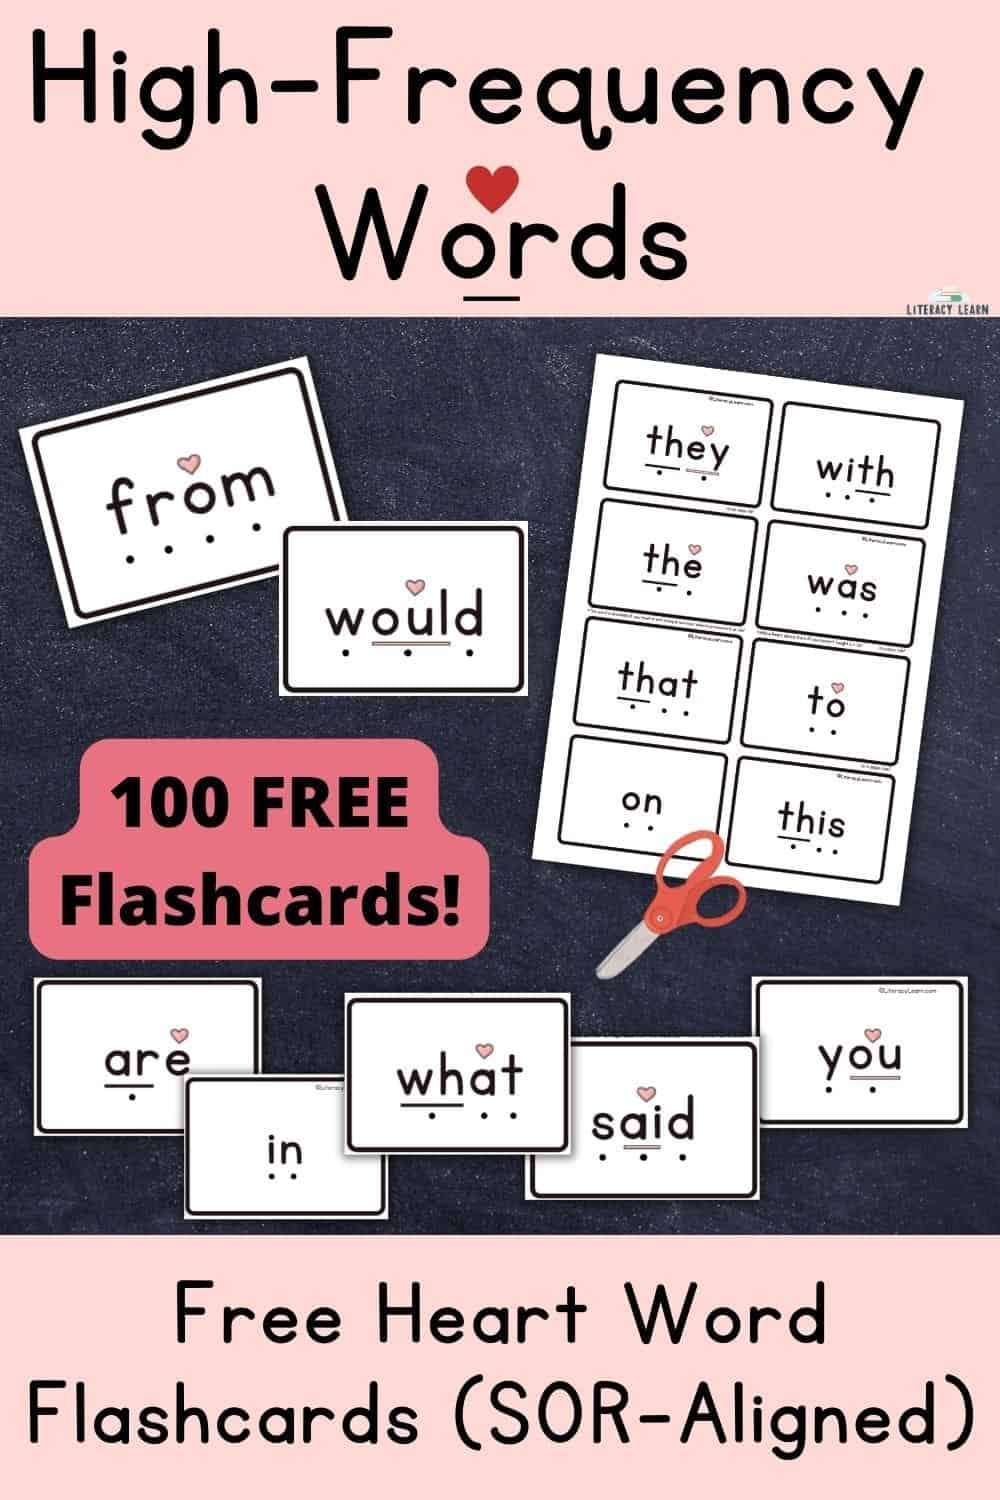 Graphic entitled "High-Frequency Words" with pictures of free SOR-aligned flashcards with heart words.